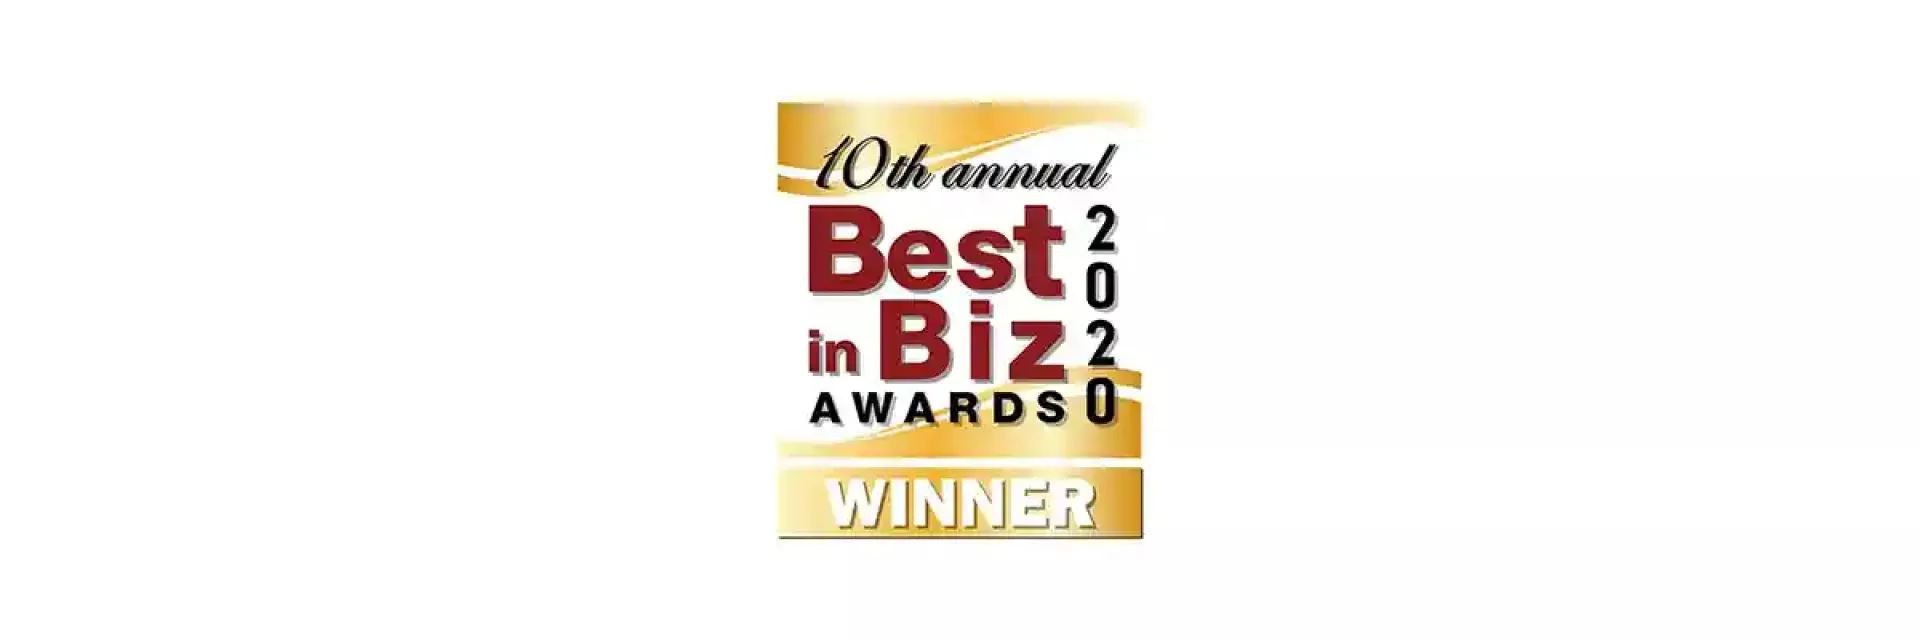 BELFOR CEO Sheldon Yellen Wins Executive of the Year Award In 10th Annual Best in Biz Awards